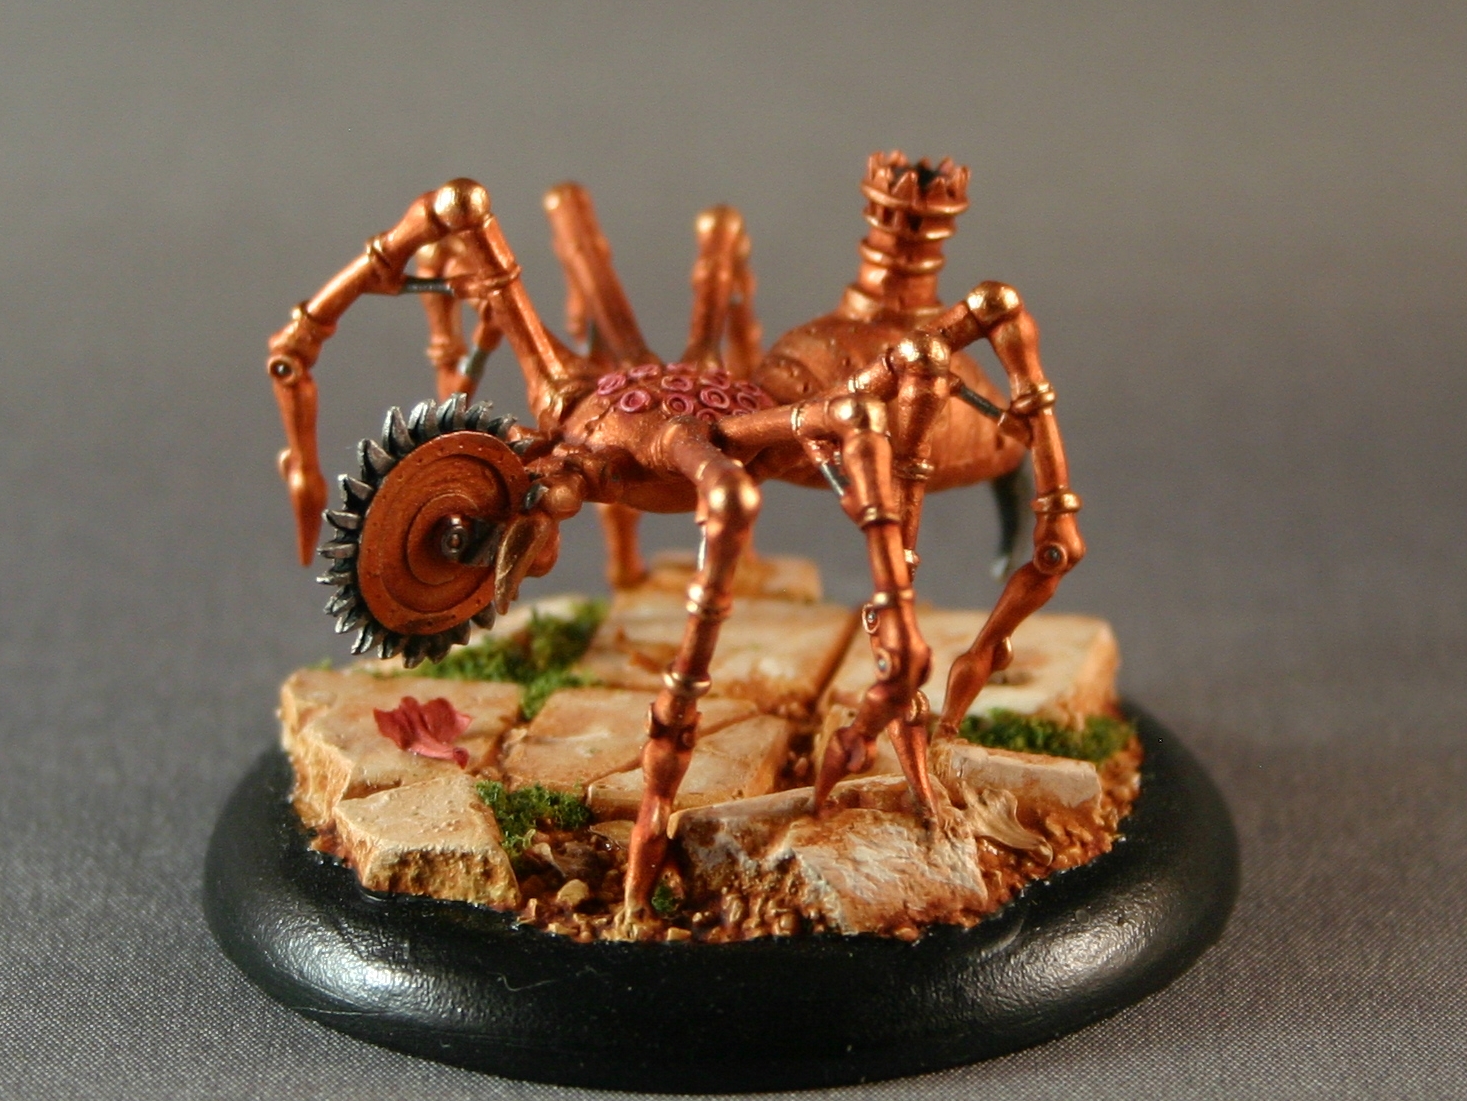 a model of a metal spider with a rusty gear wheel